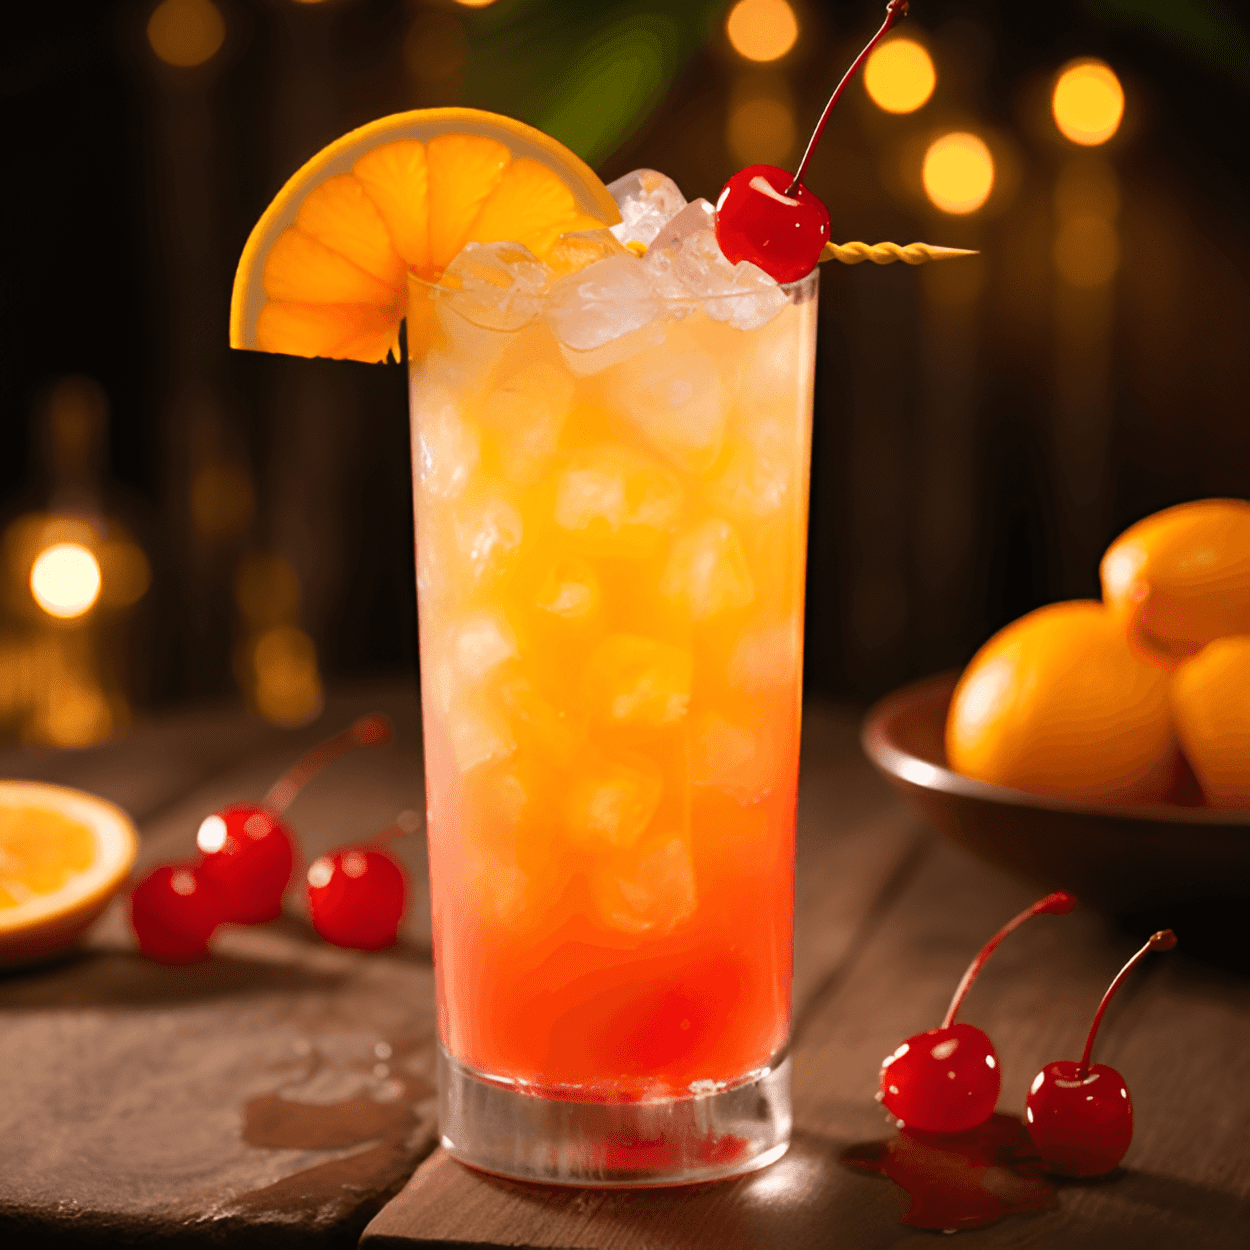 Kitty Non Alcoholic Cocktail Recipe - The Kitty Non Alcoholic Cocktail is a refreshing, fruity concoction. It has a sweet and tangy taste, with a hint of citrus. The combination of orange juice and pineapple juice gives it a tropical vibe, while the grenadine adds a dash of sweetness.